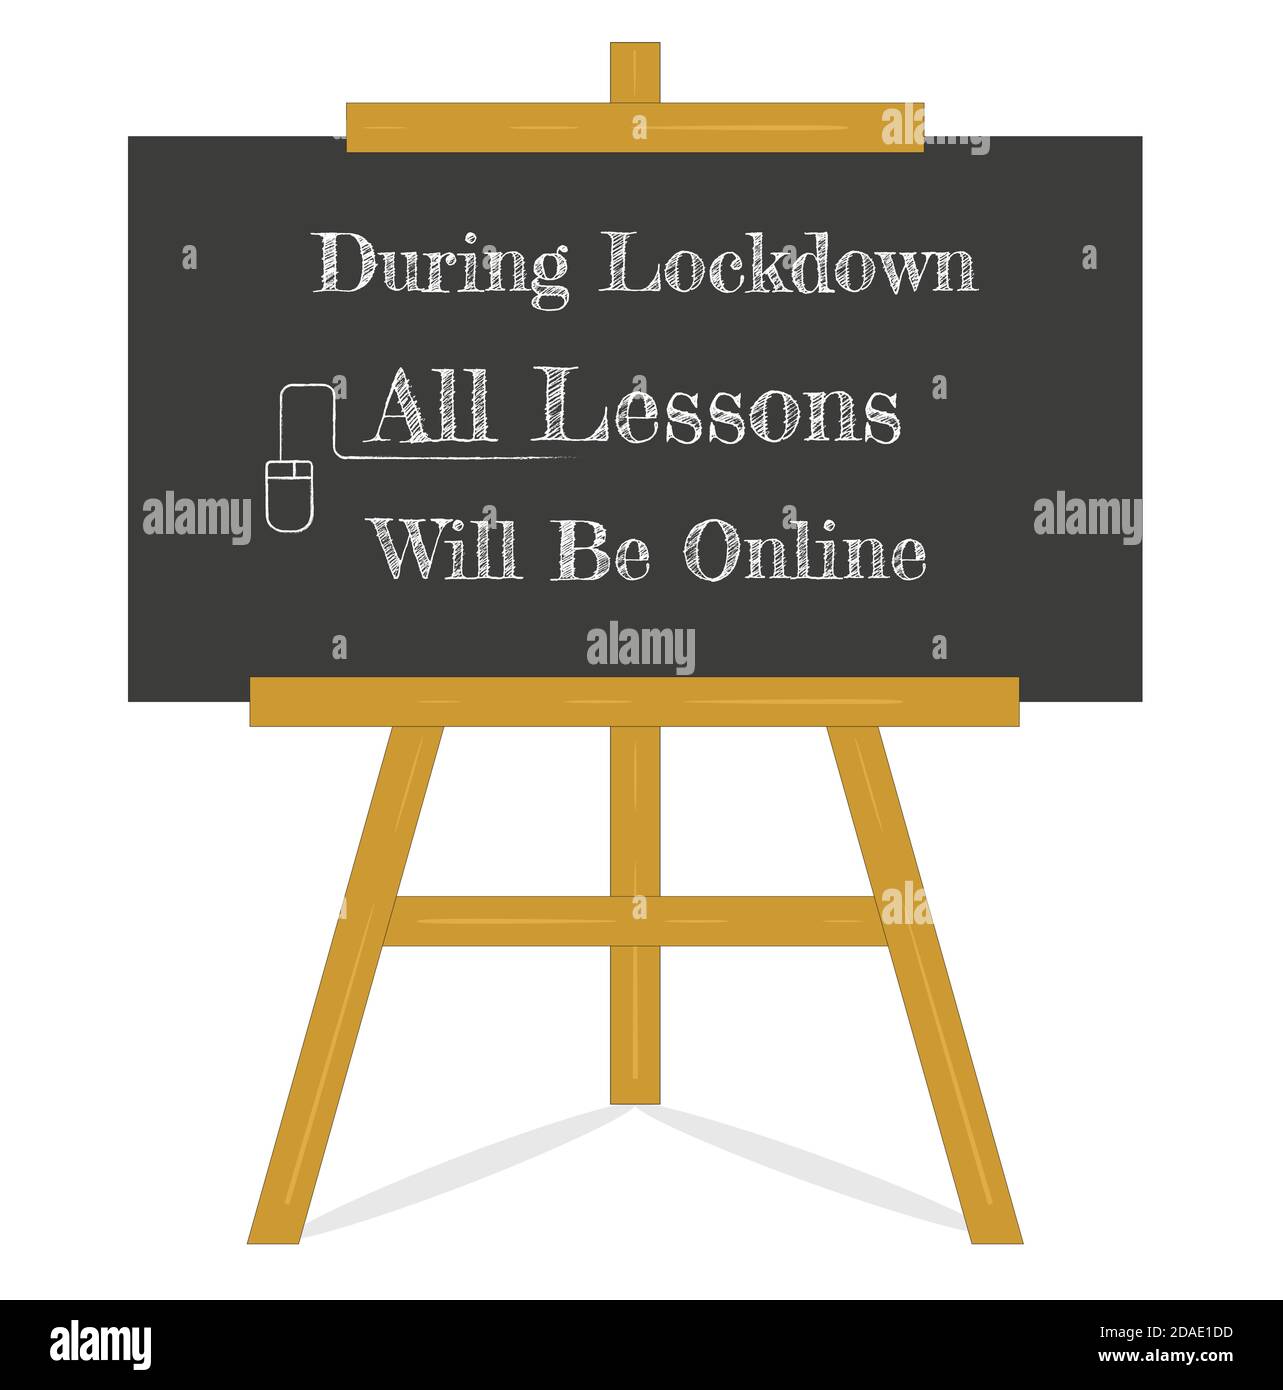 During lockdown all lessons will be online Blackboard on a wooden easel, black chalkboard on an old style wooden easel isolated on white background. Stock Vector